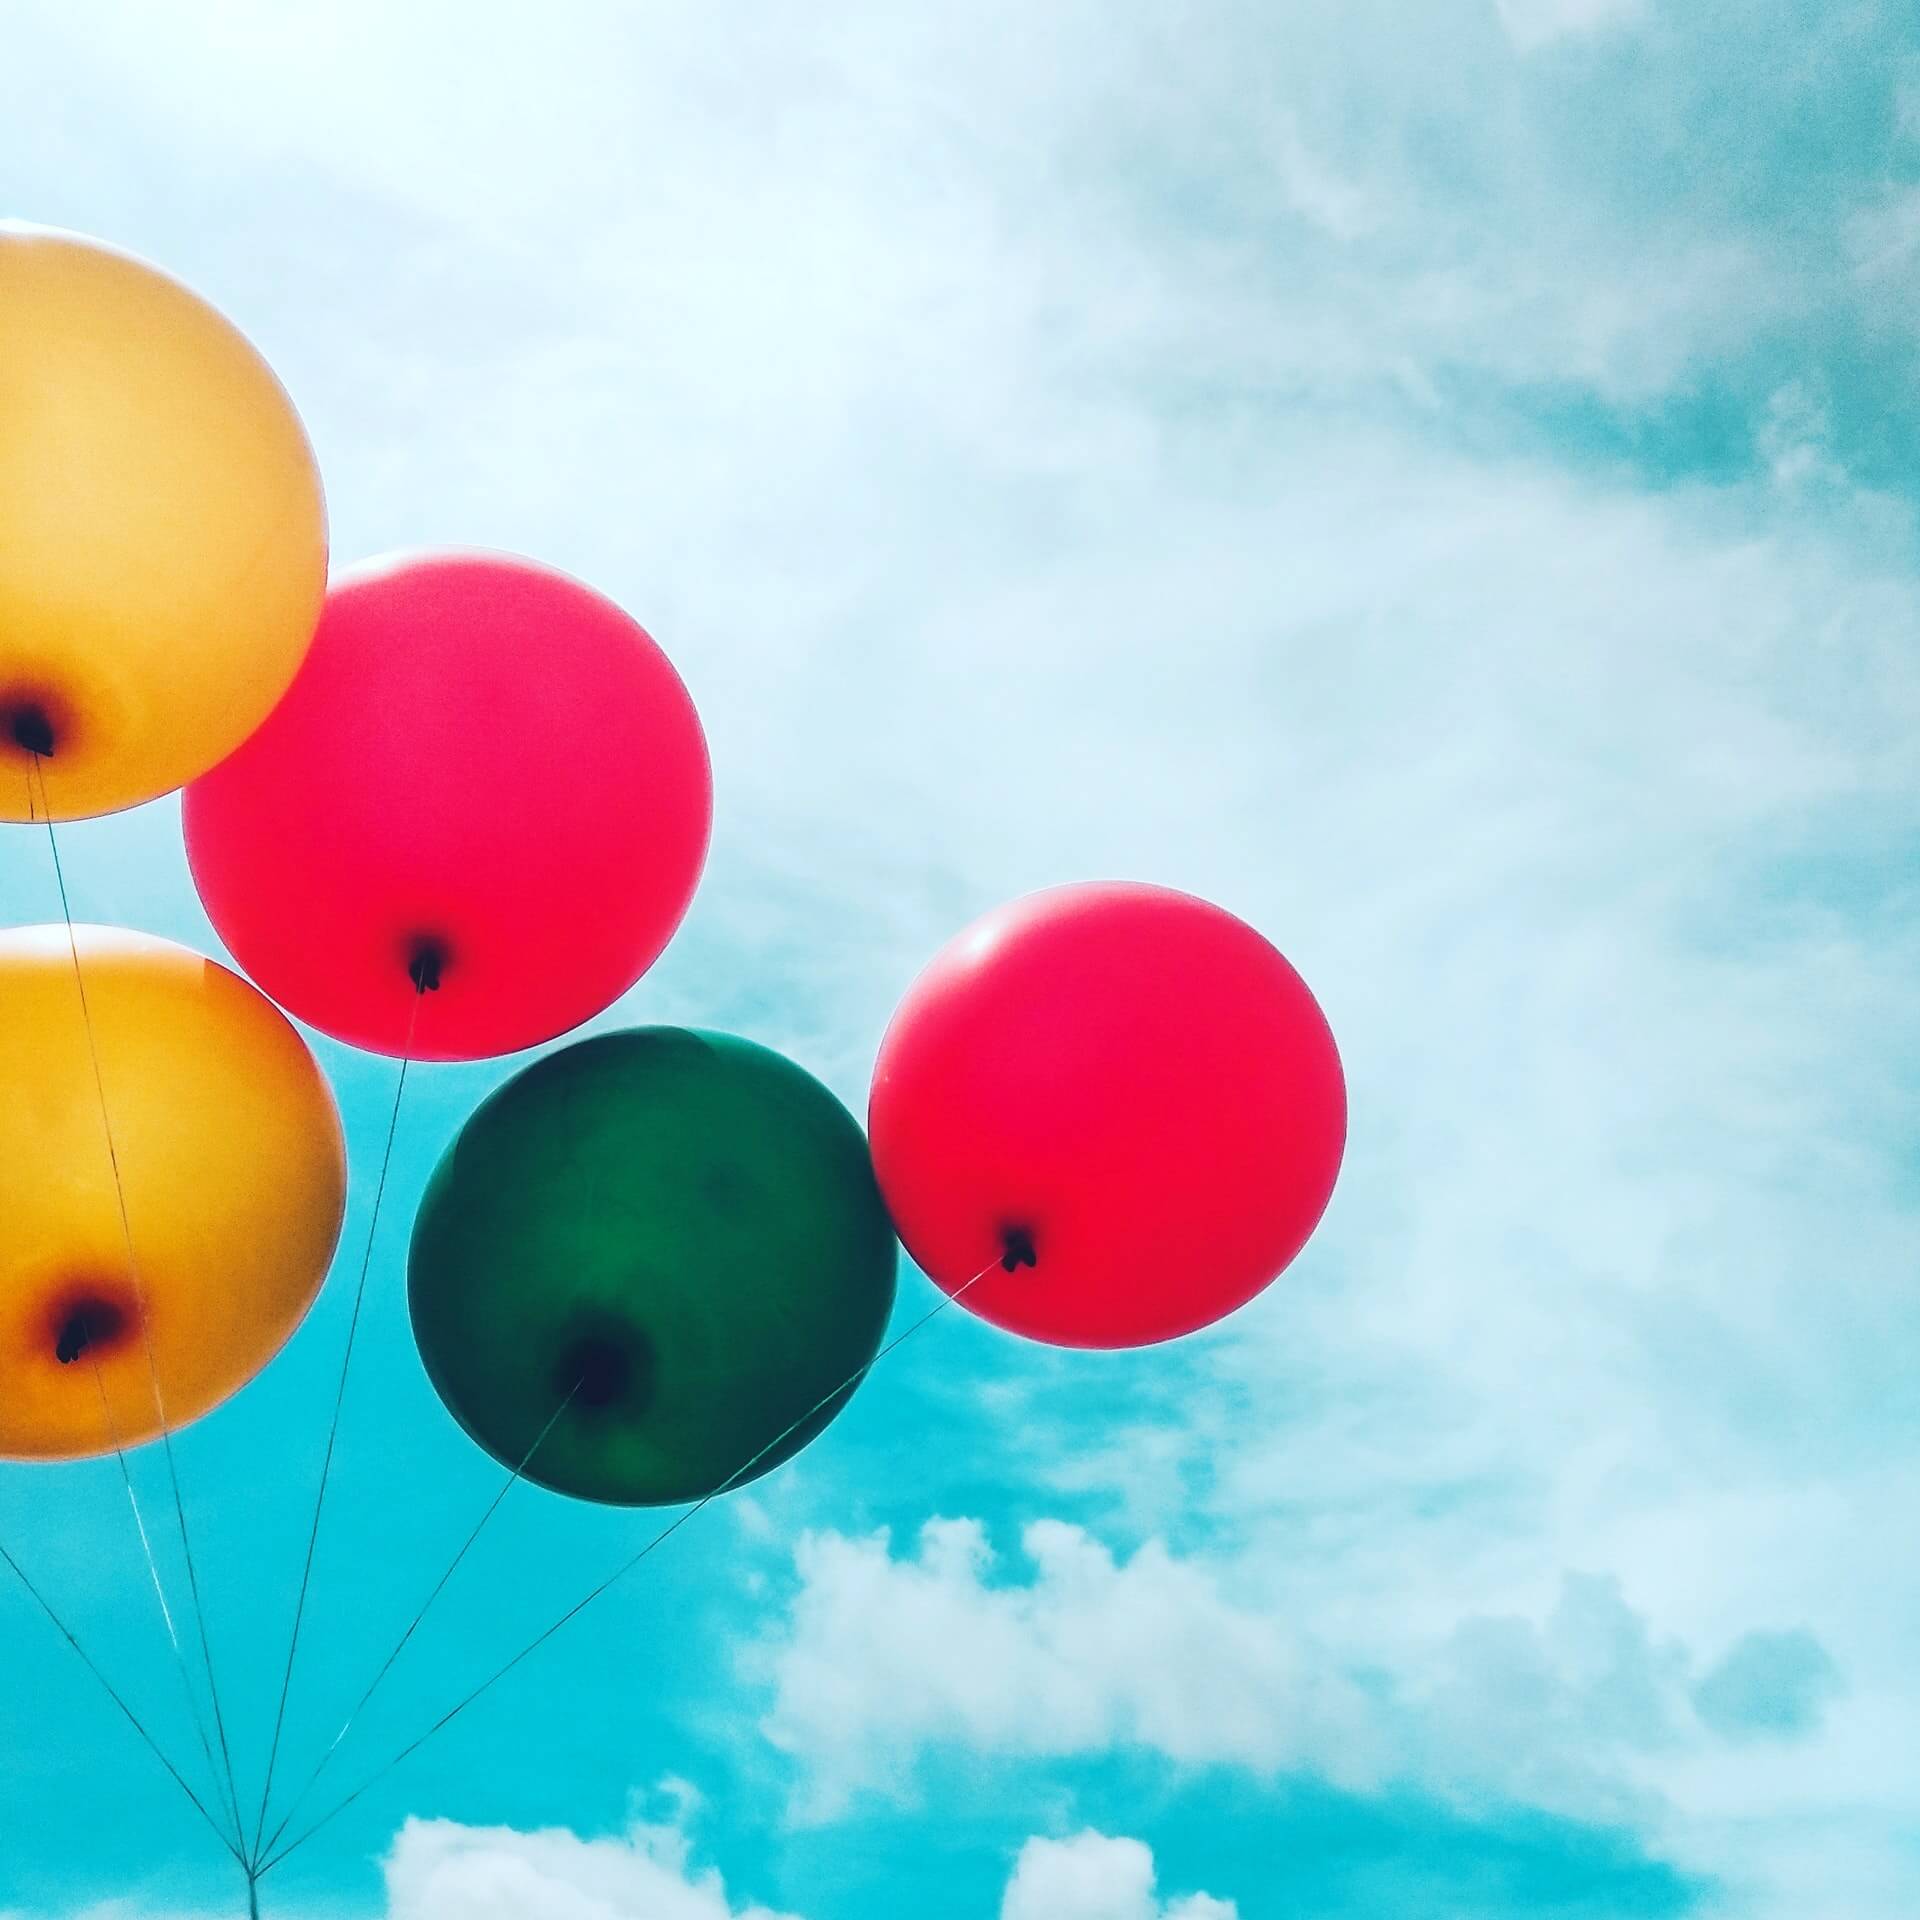 bright-blue-sky-with-colorful-balloons